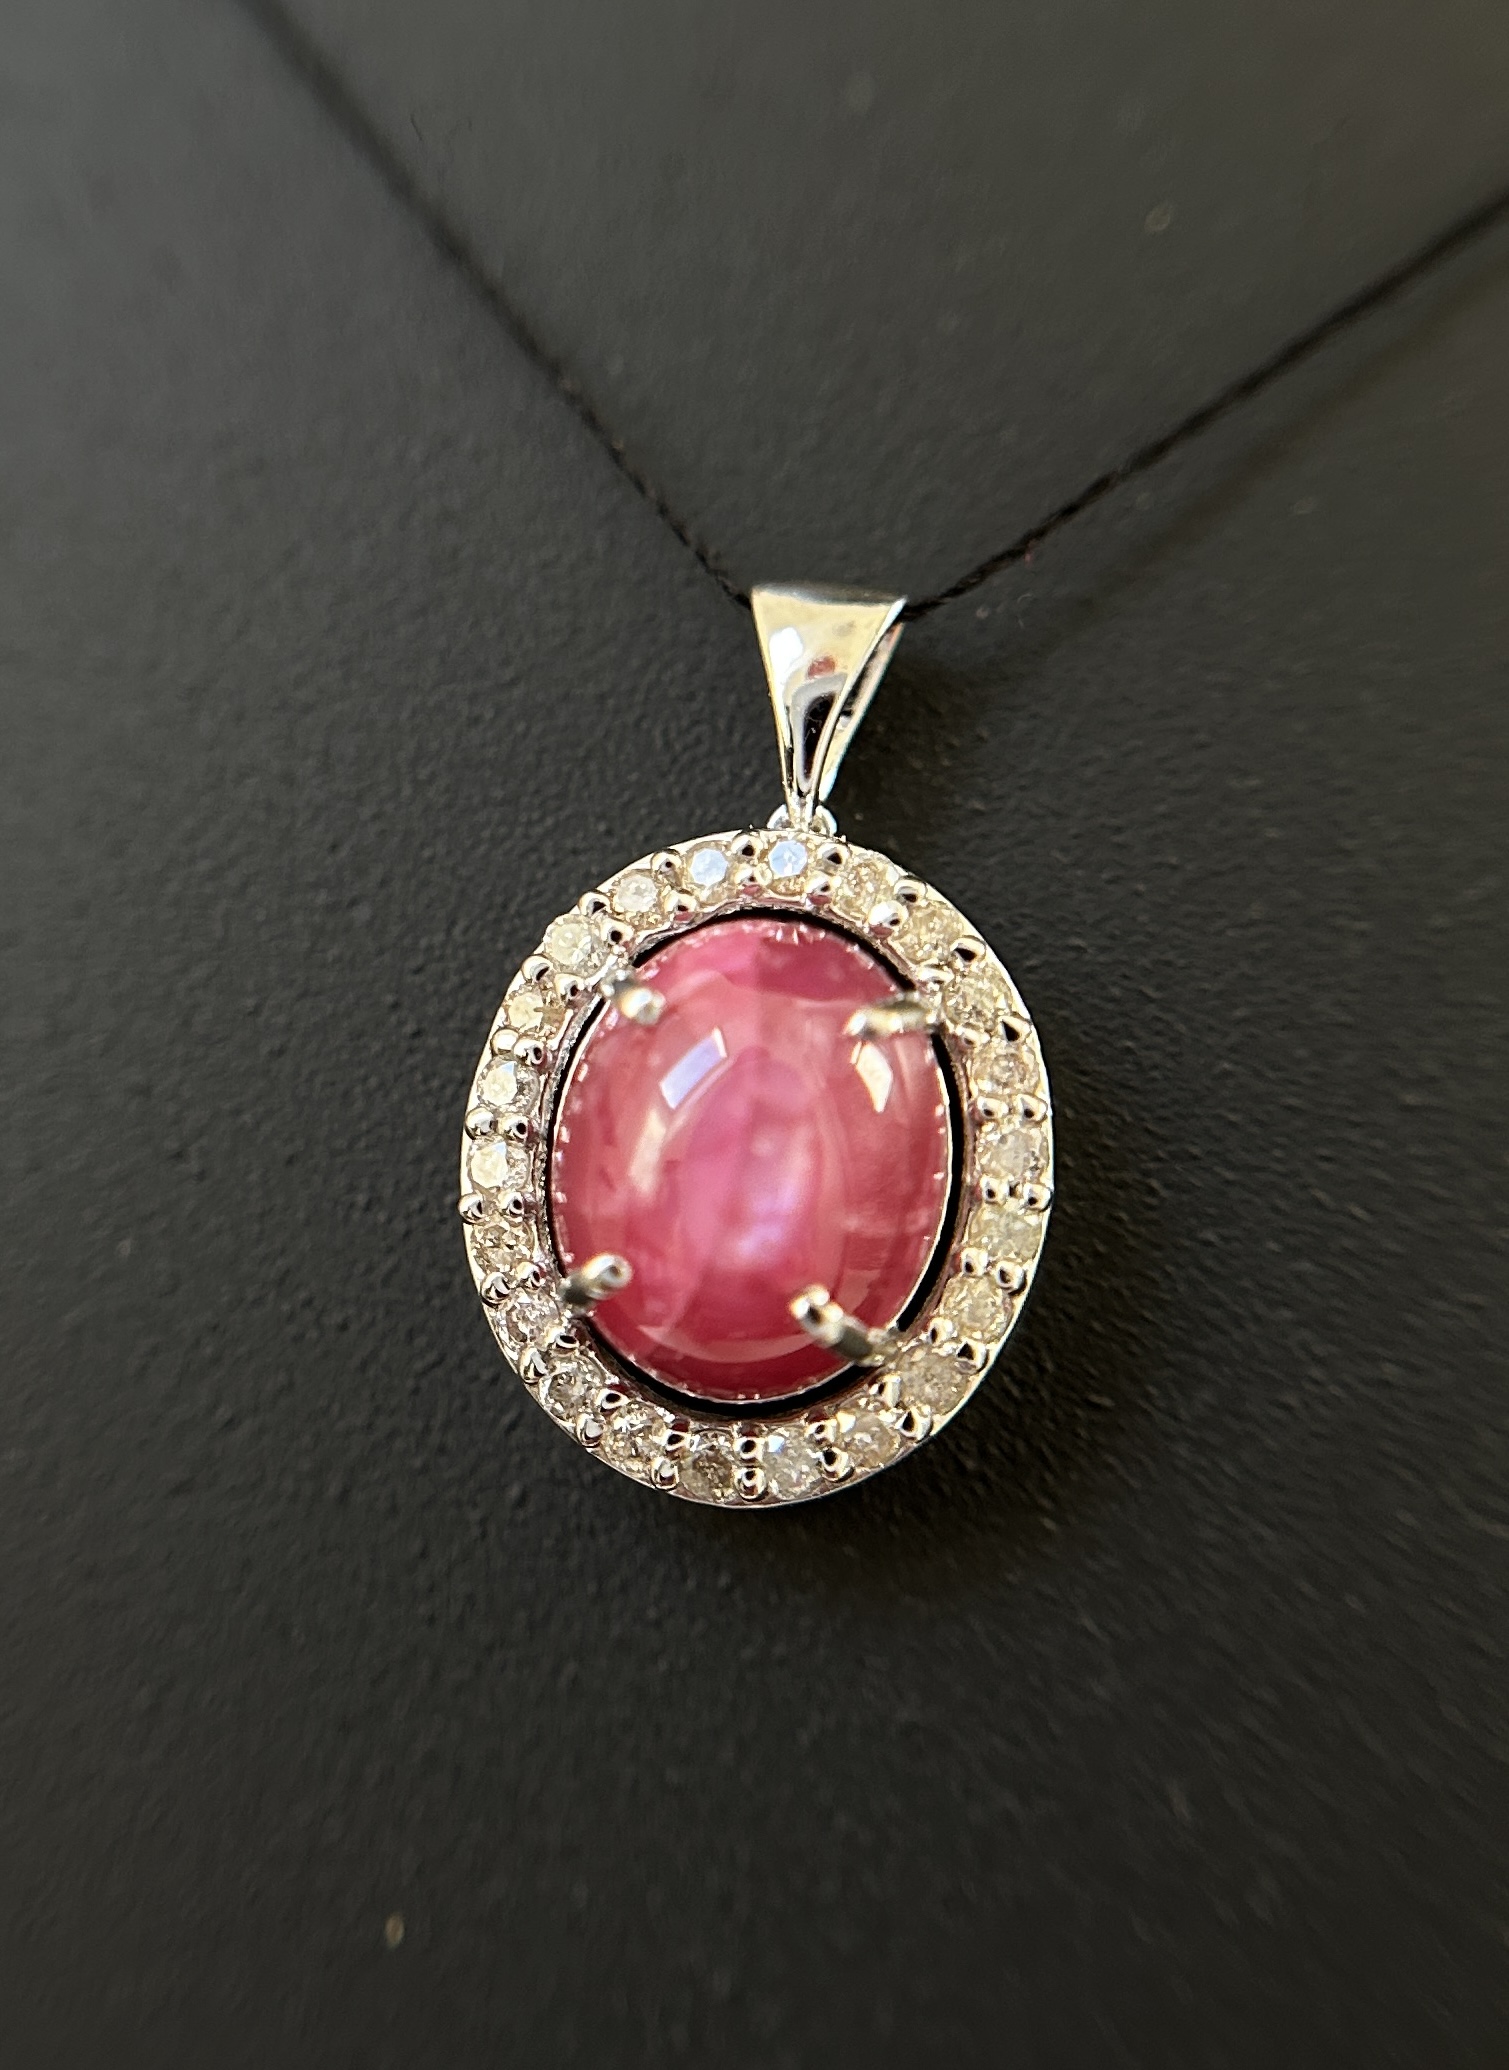 Beautiful Natural Star Ruby Pendant 2.35Ct With Natural Diamonds & 18k Gold - Image 7 of 10